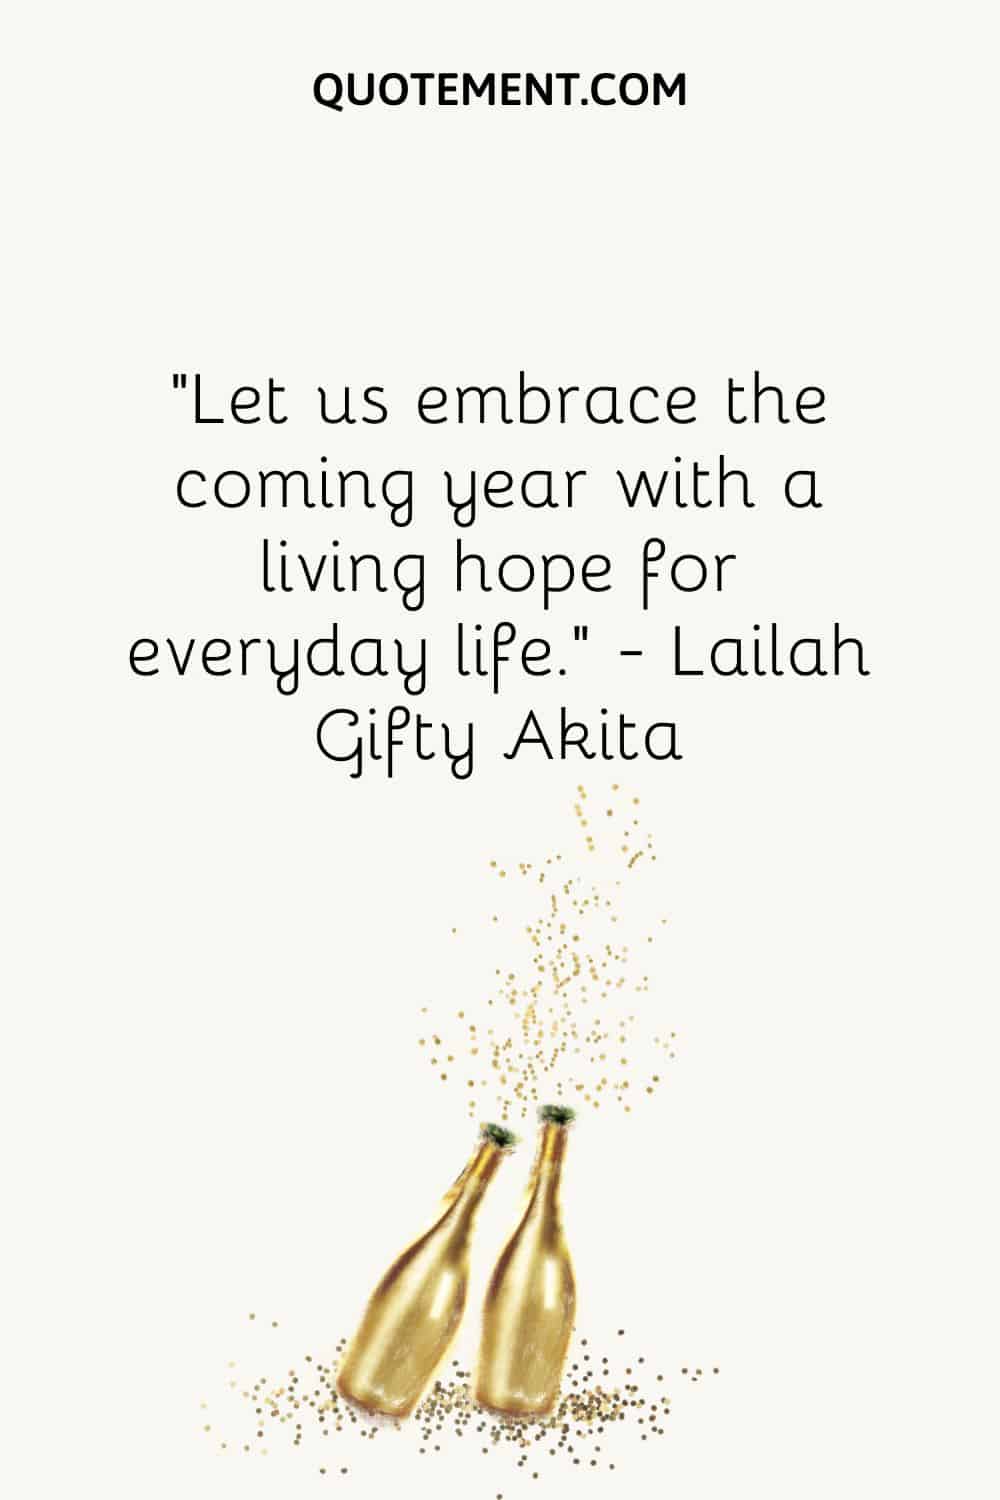 “Let us embrace the coming year with a living hope for everyday life.” ― Lailah Gifty Akita